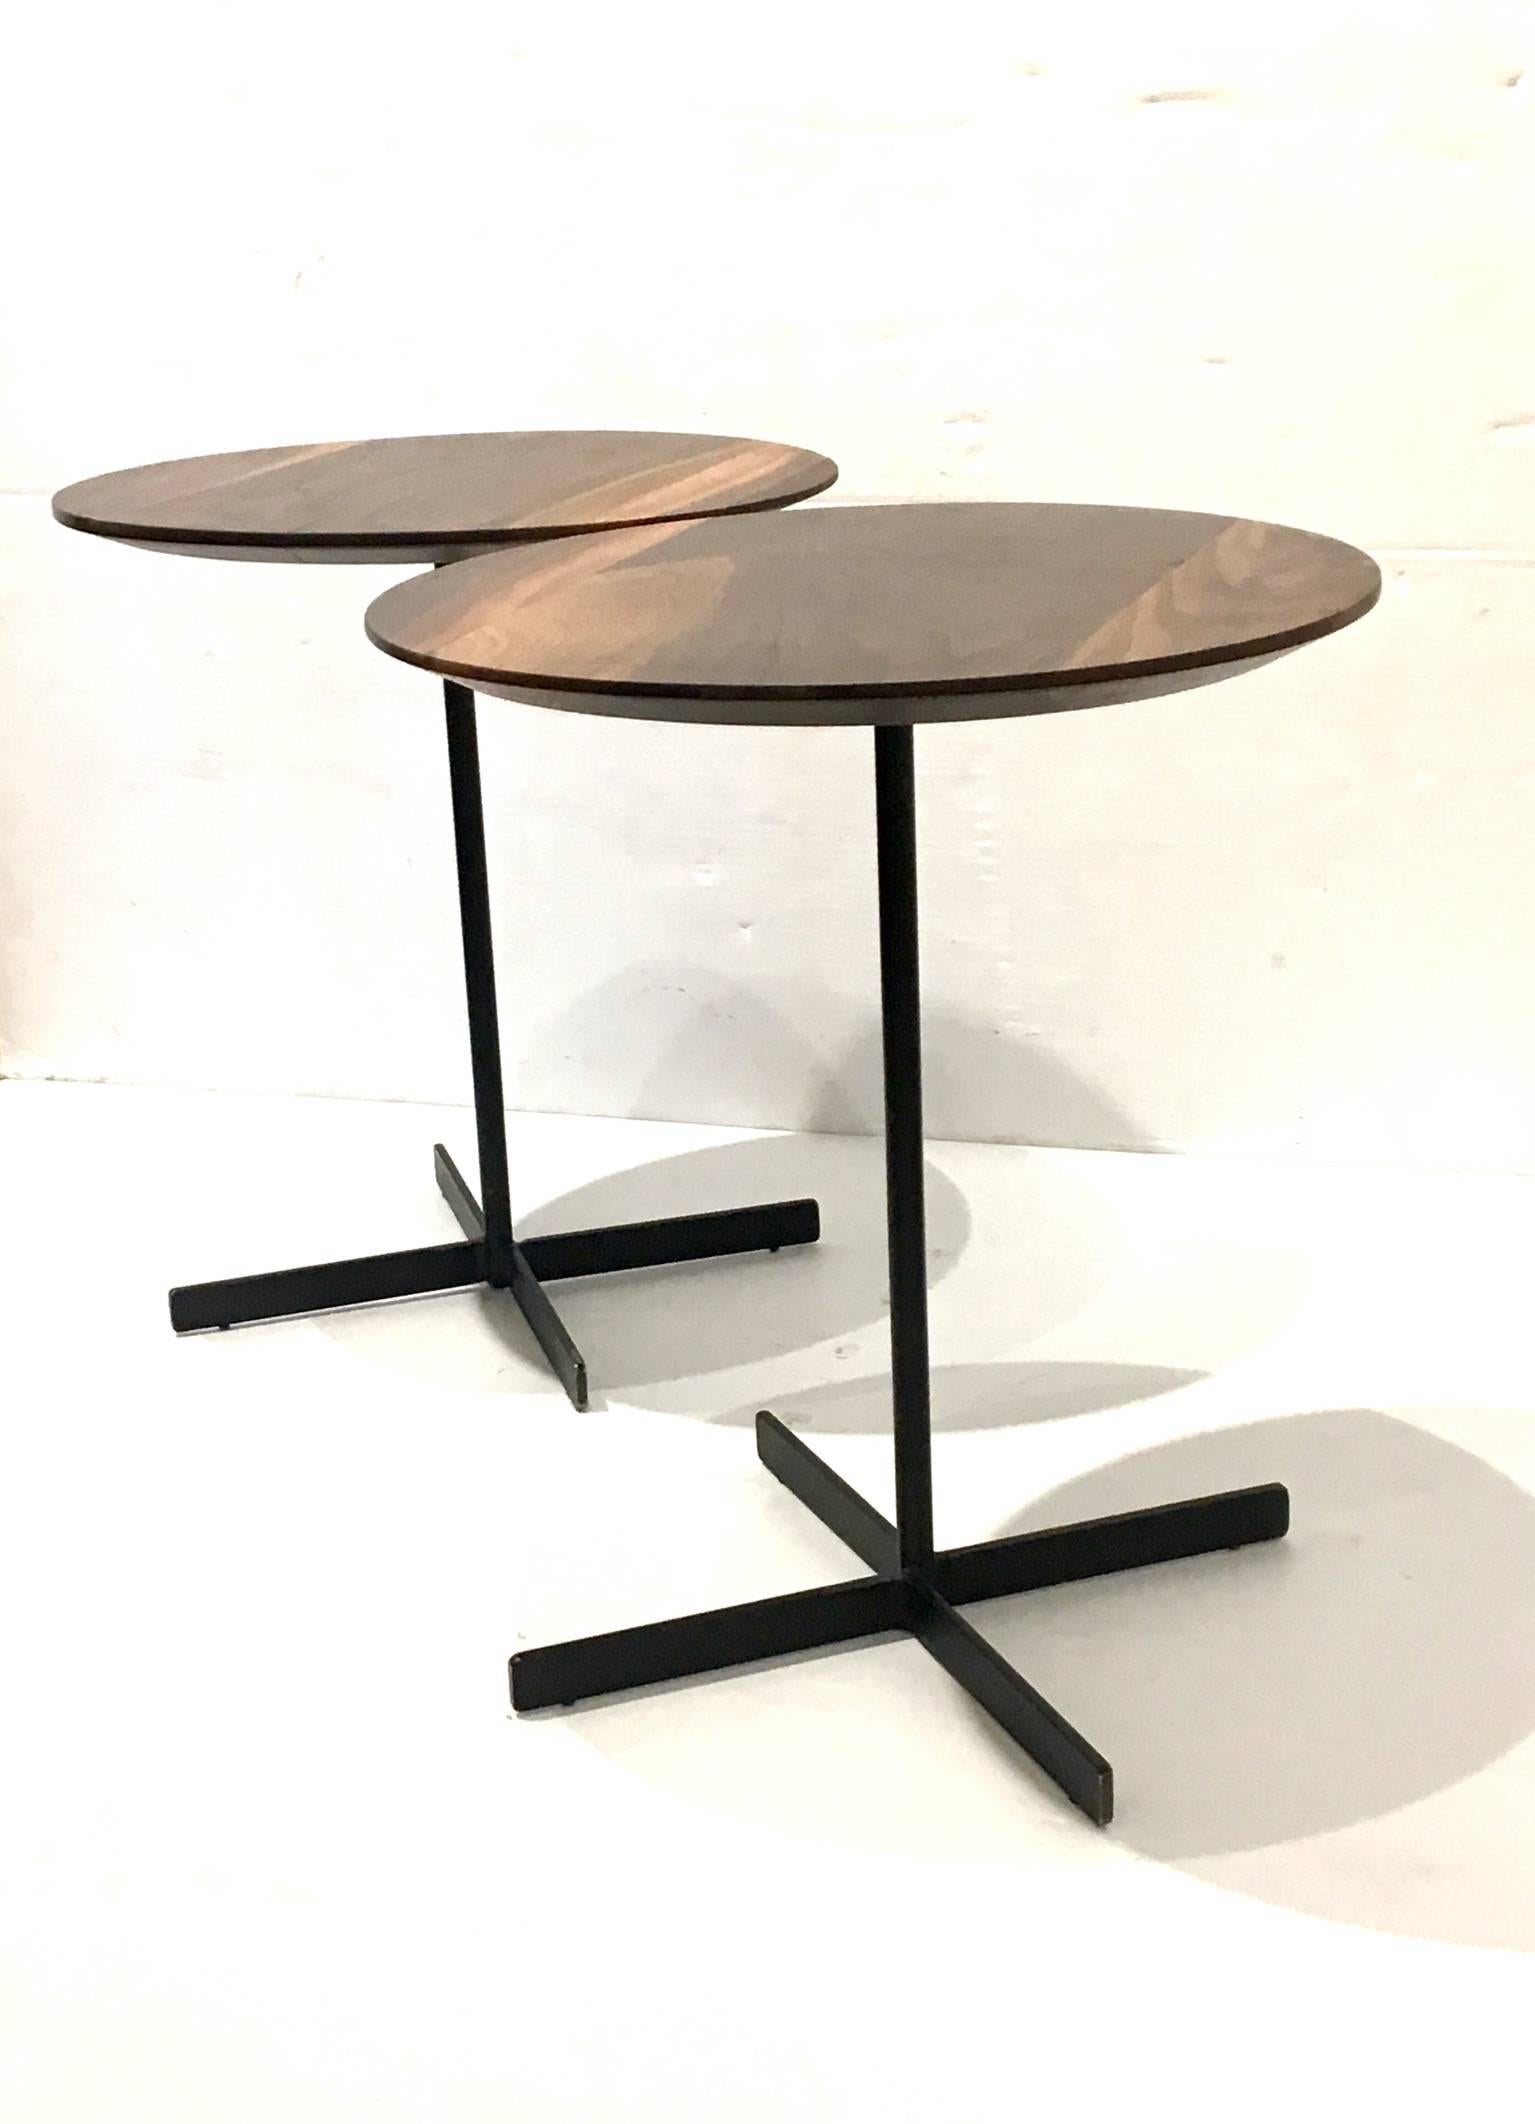 20th Century Pair of American Black Walnut Cocktail Tables with Iron Bases